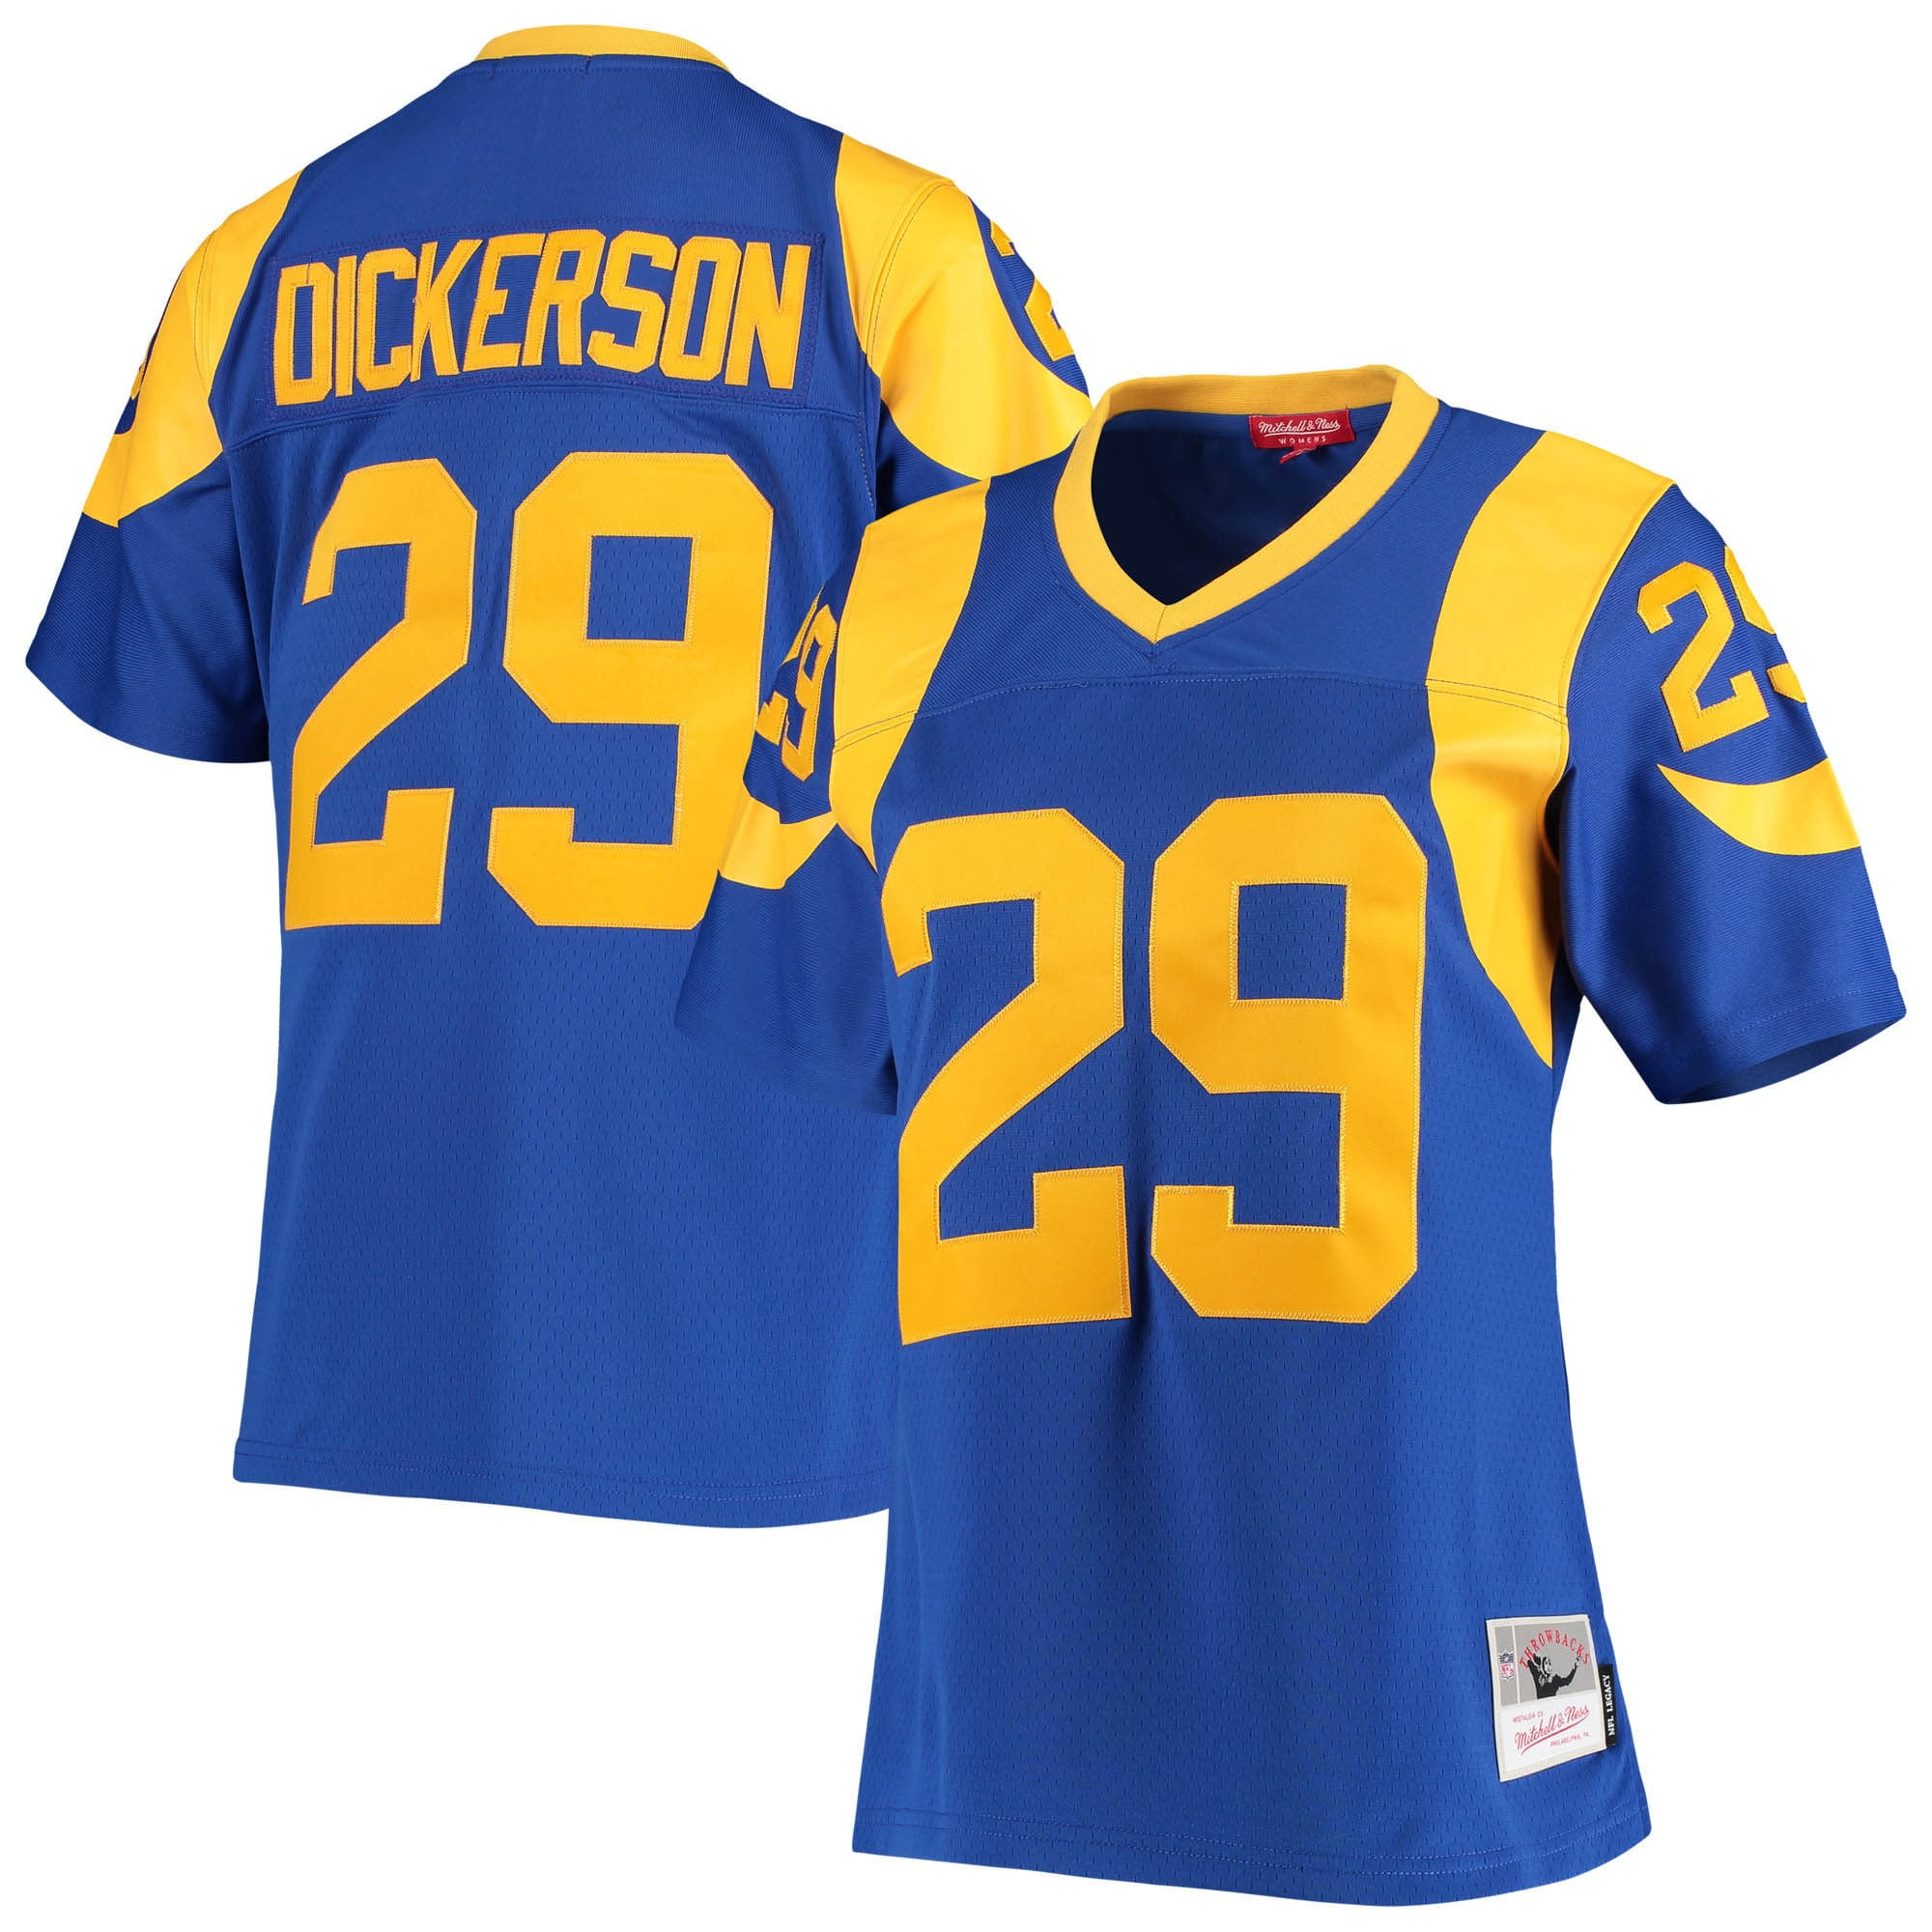 eric dickerson white jersey